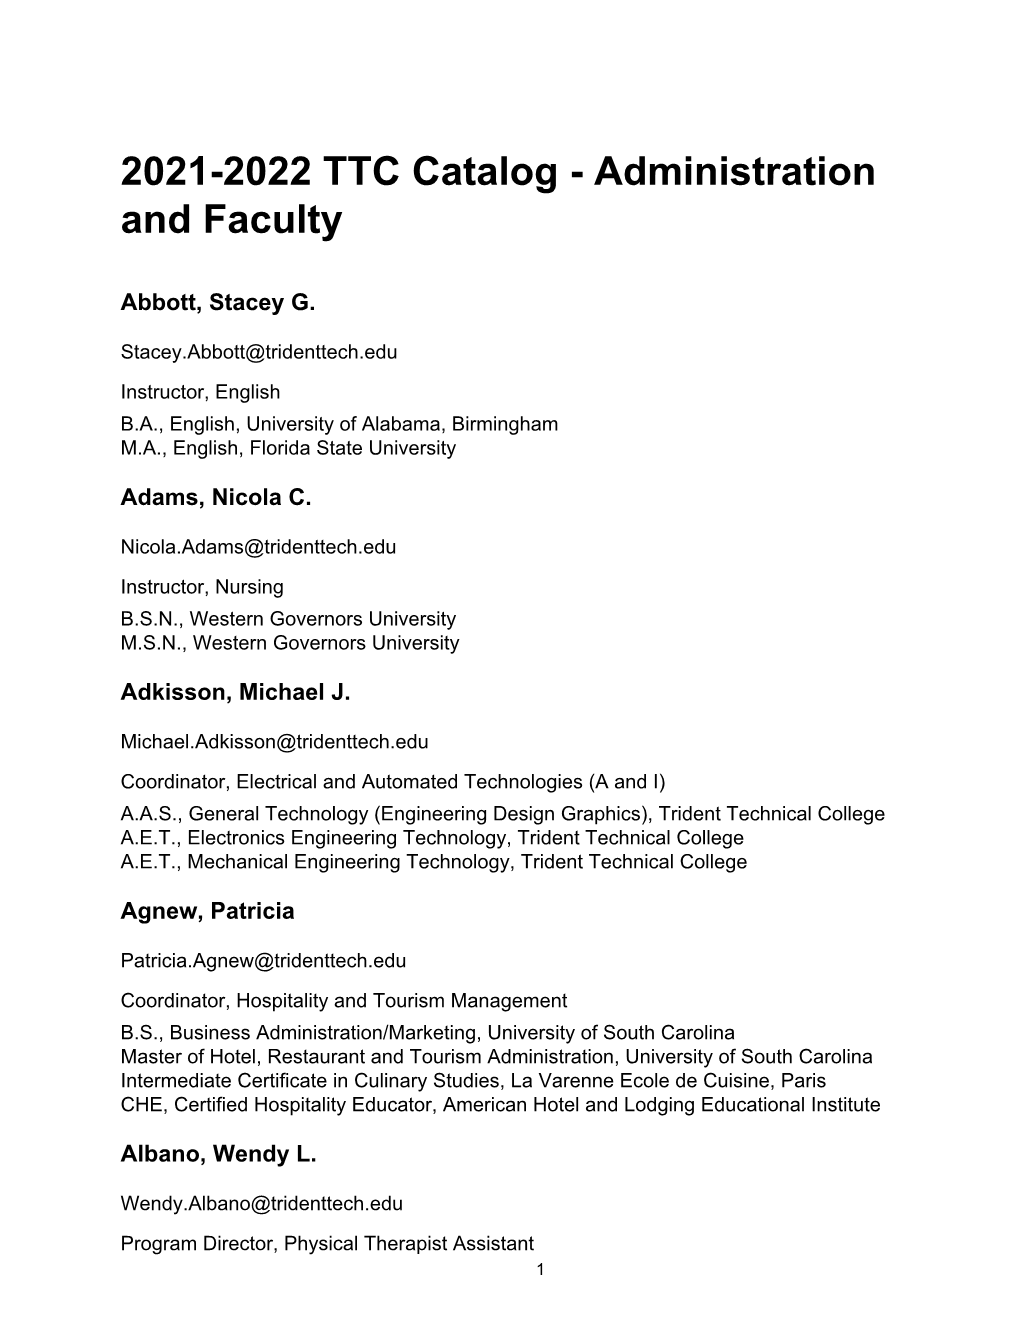 2021-2022 TTC Catalog - Administration and Faculty